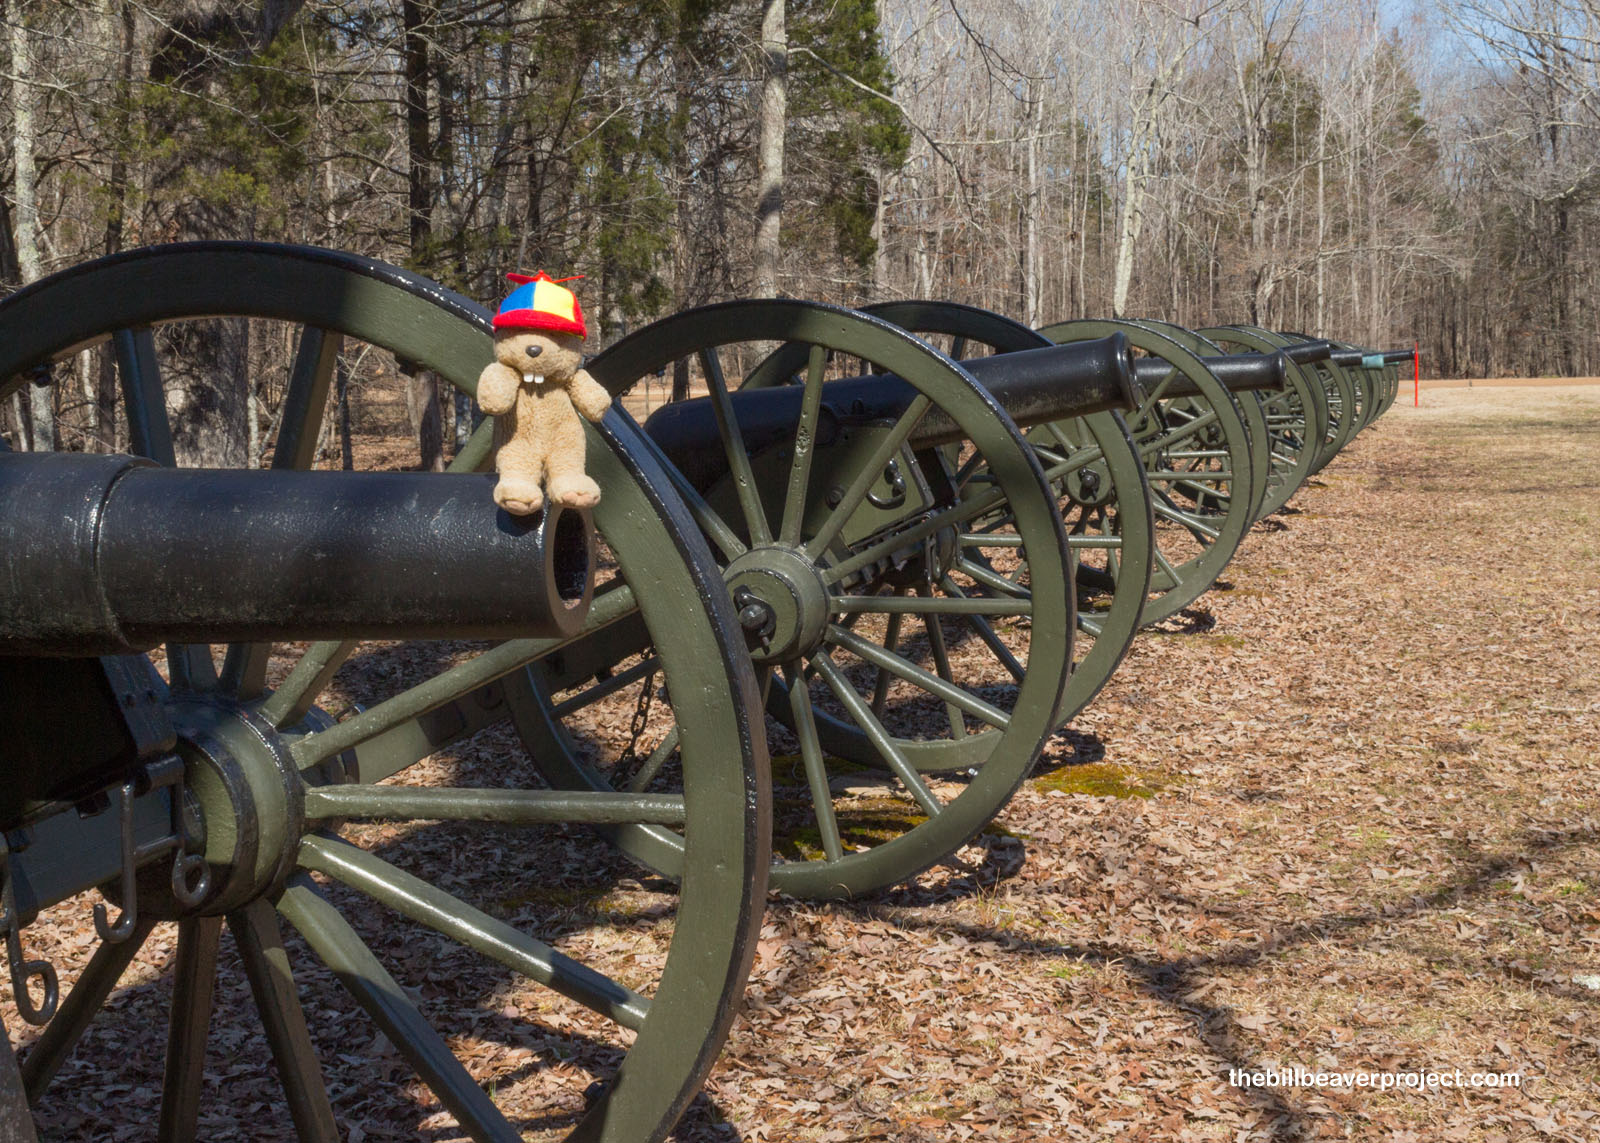 Ruggles' Battery of over 50 cannons!